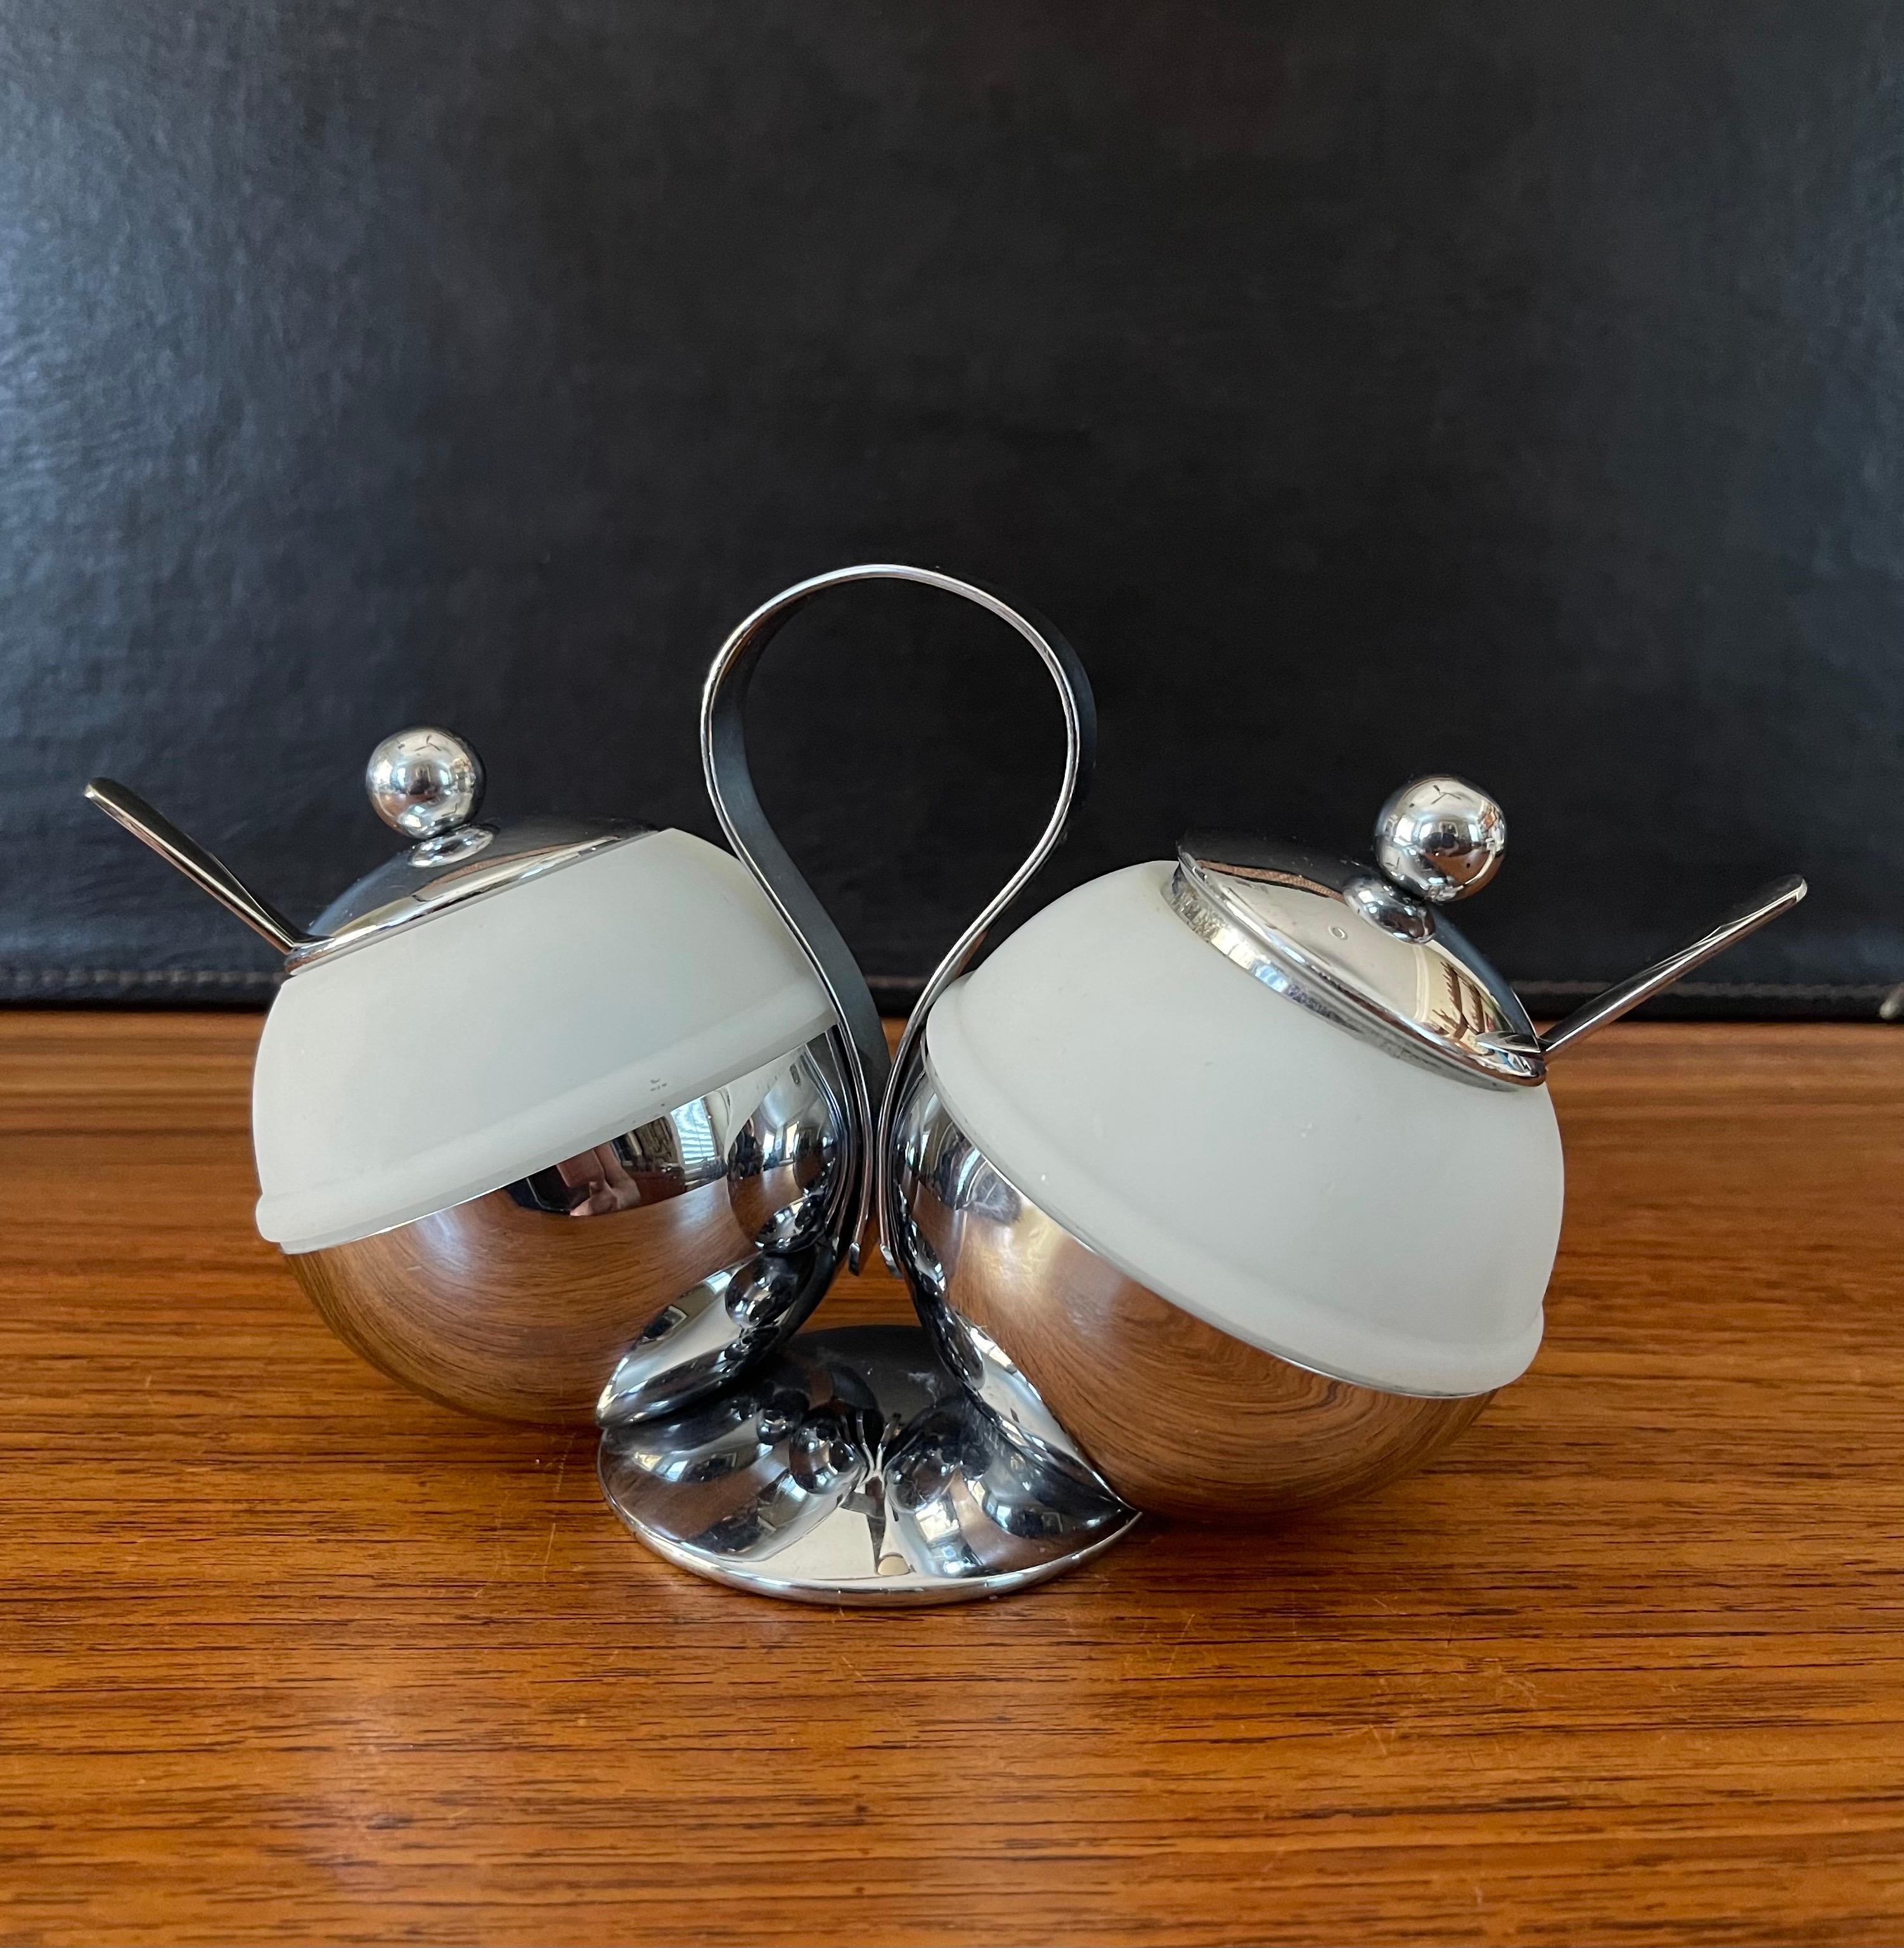 Art Deco chrome & white glass double condiment server with spoons by Chase & Co., circa 1930s. The piece is in very good to excellent vintage condition and measures 6.5